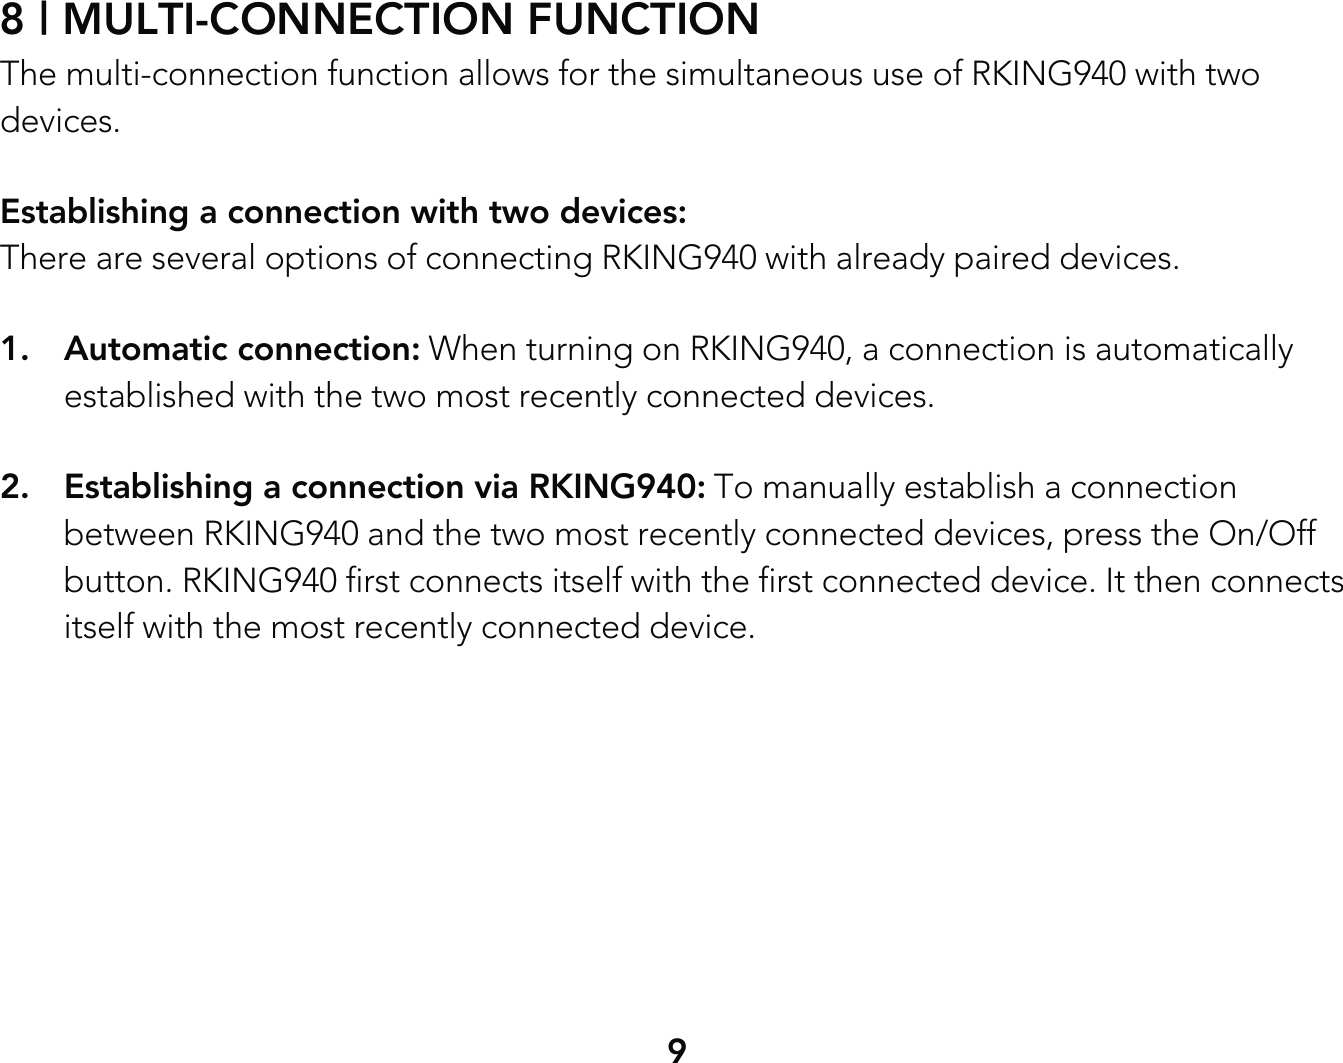 98 | MULTI-CONNECTION FUNCTIONThe multi-connection function allows for the simultaneous use of RKING940 with two devices.Establishing a connection with two devices: There are several options of connecting RKING940 with already paired devices.1. Automatic connection: When turning on RKING940, a connection is automatically   established with the two most recently connected devices.2.  Establishing a connection via RKING940: To manually establish a connection   between RKING940 and the two most recently connected devices, press the On/Off   button. RKING940 first connects itself with the first connected device. It then connects   itself with the most recently connected device.